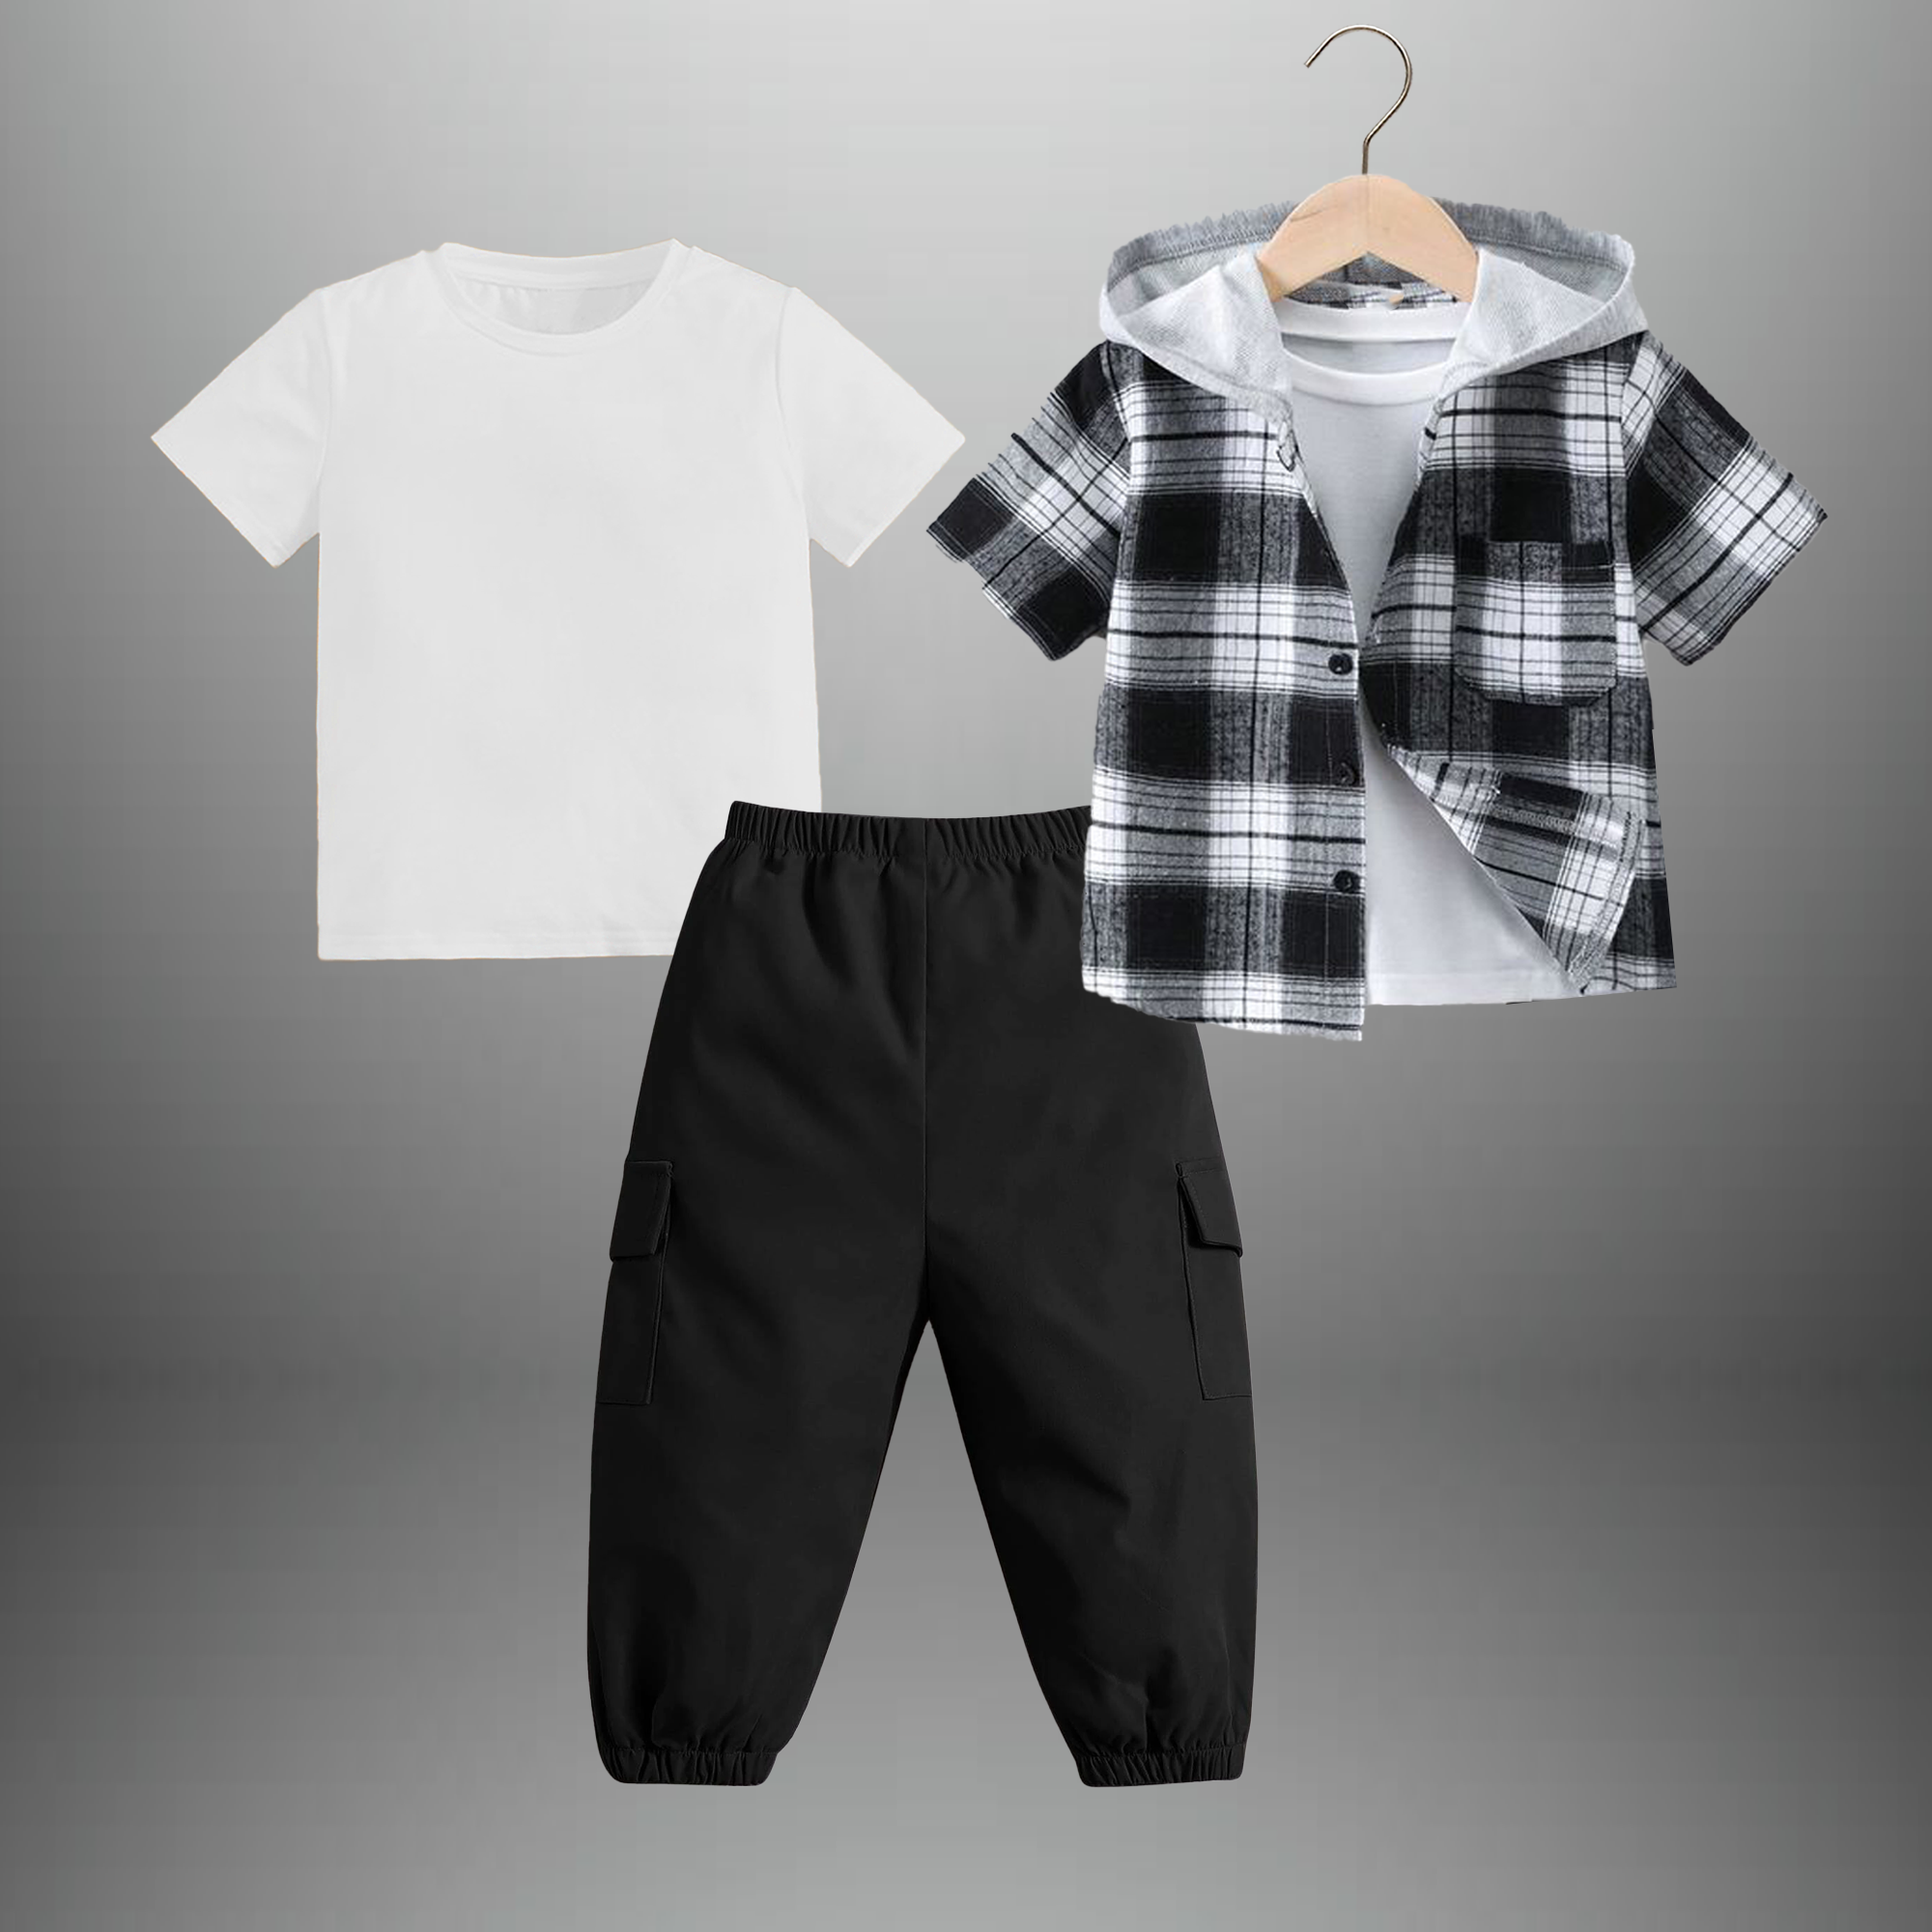 Boy's 3 piece set of Black Cargo pant ,Black and white hooded Checkered shirt with a t-shirt-RKFCW545